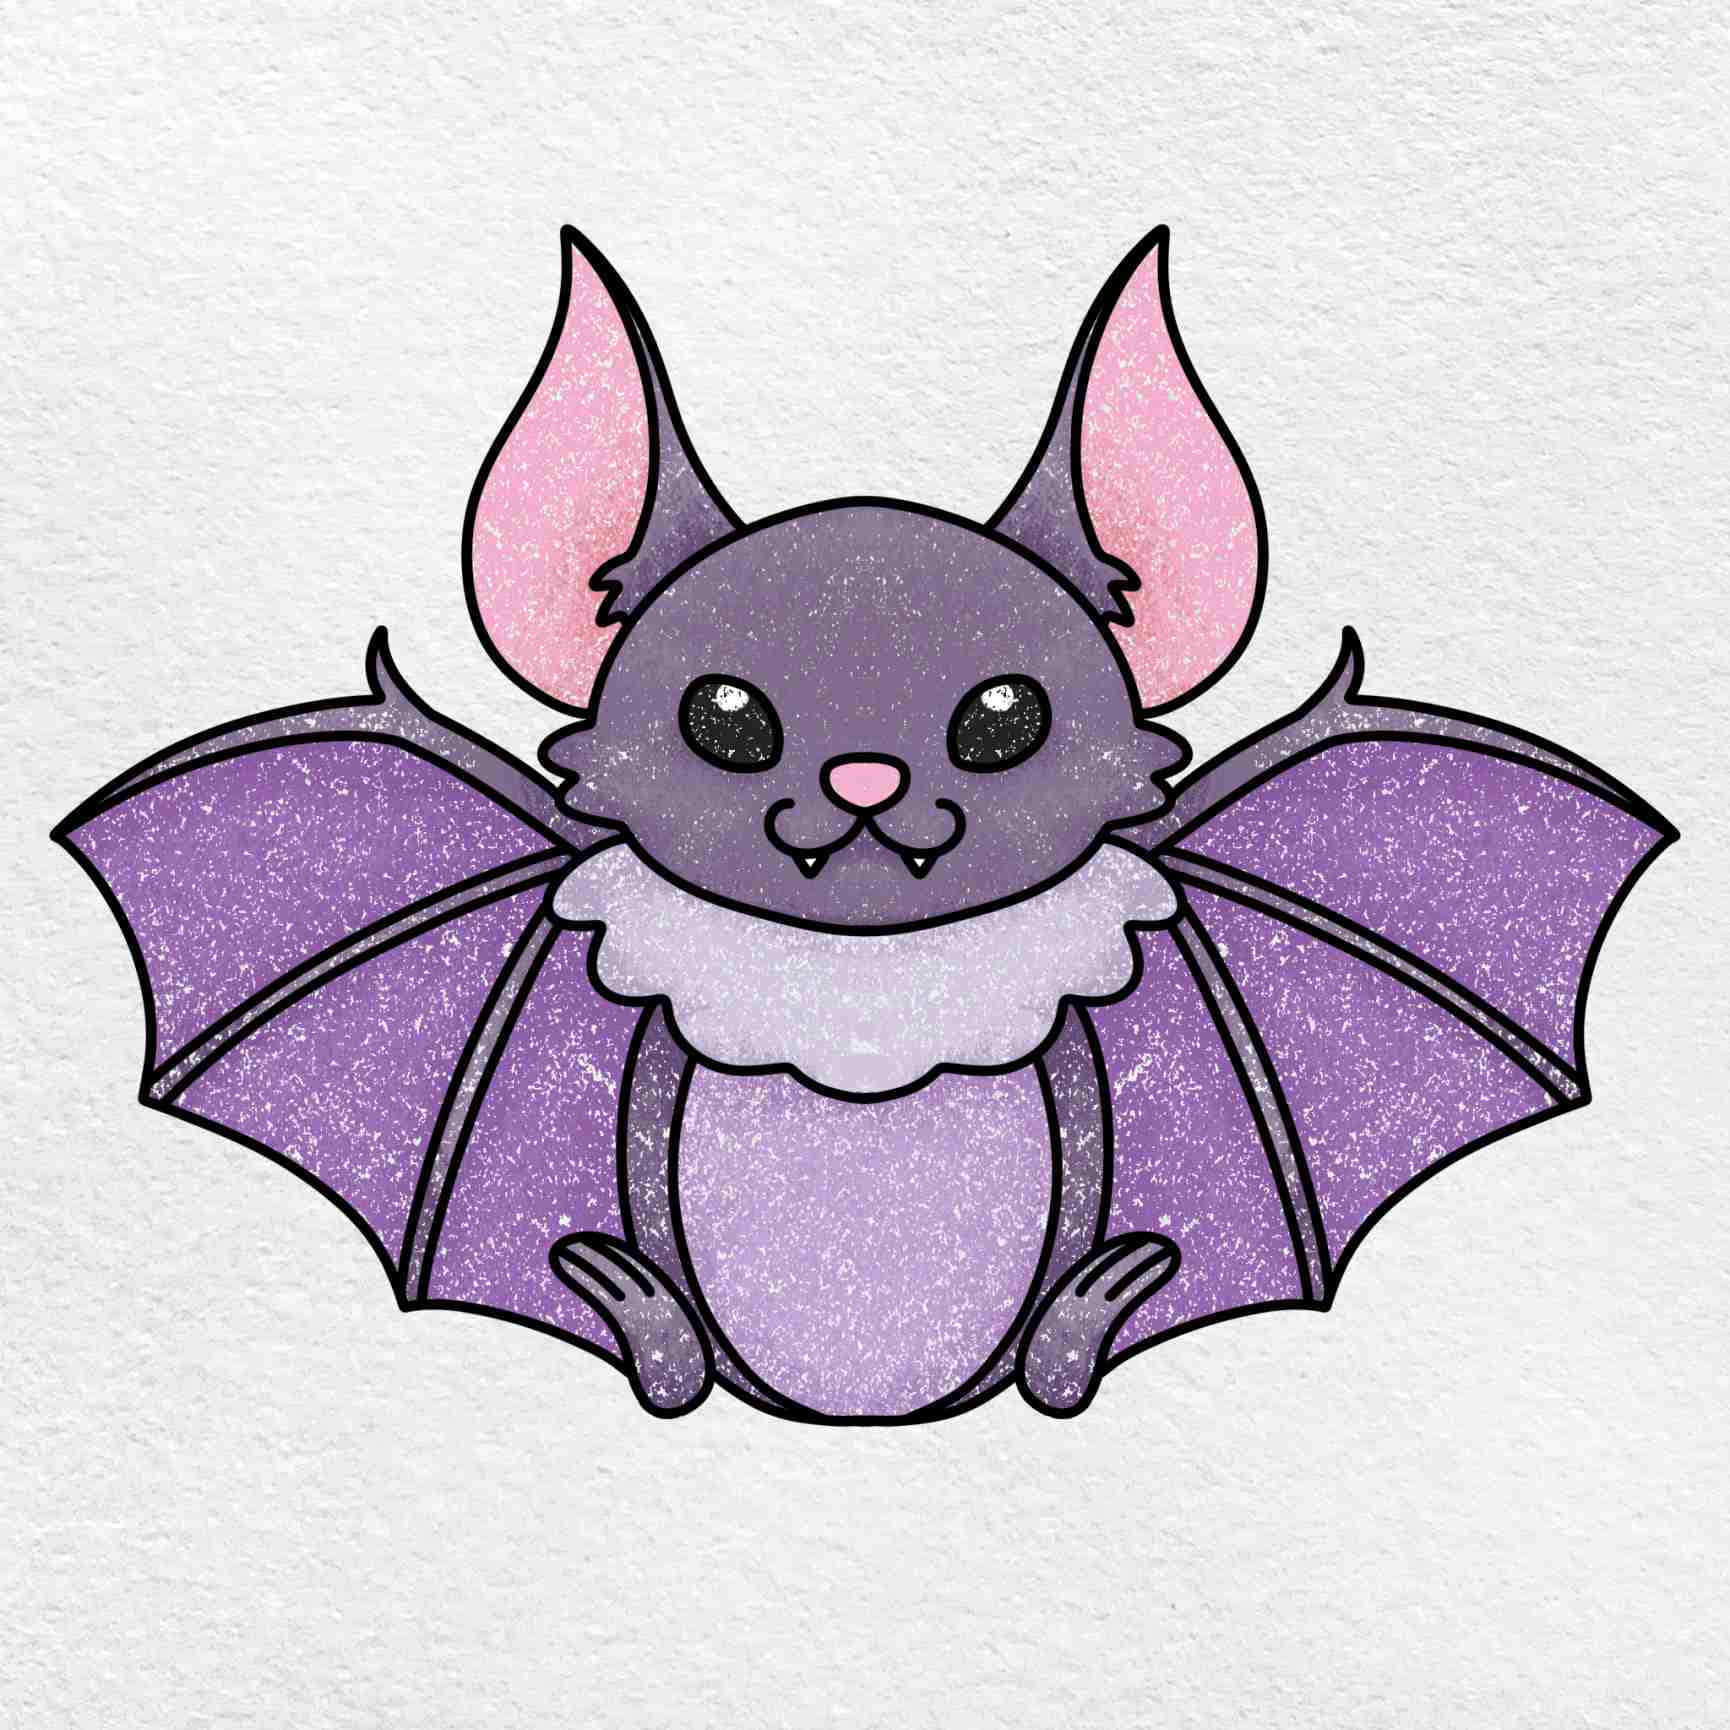 Learn How to Draw a Bat in this Step by Step Bat Drawing Tutorial -  CraftyThinking